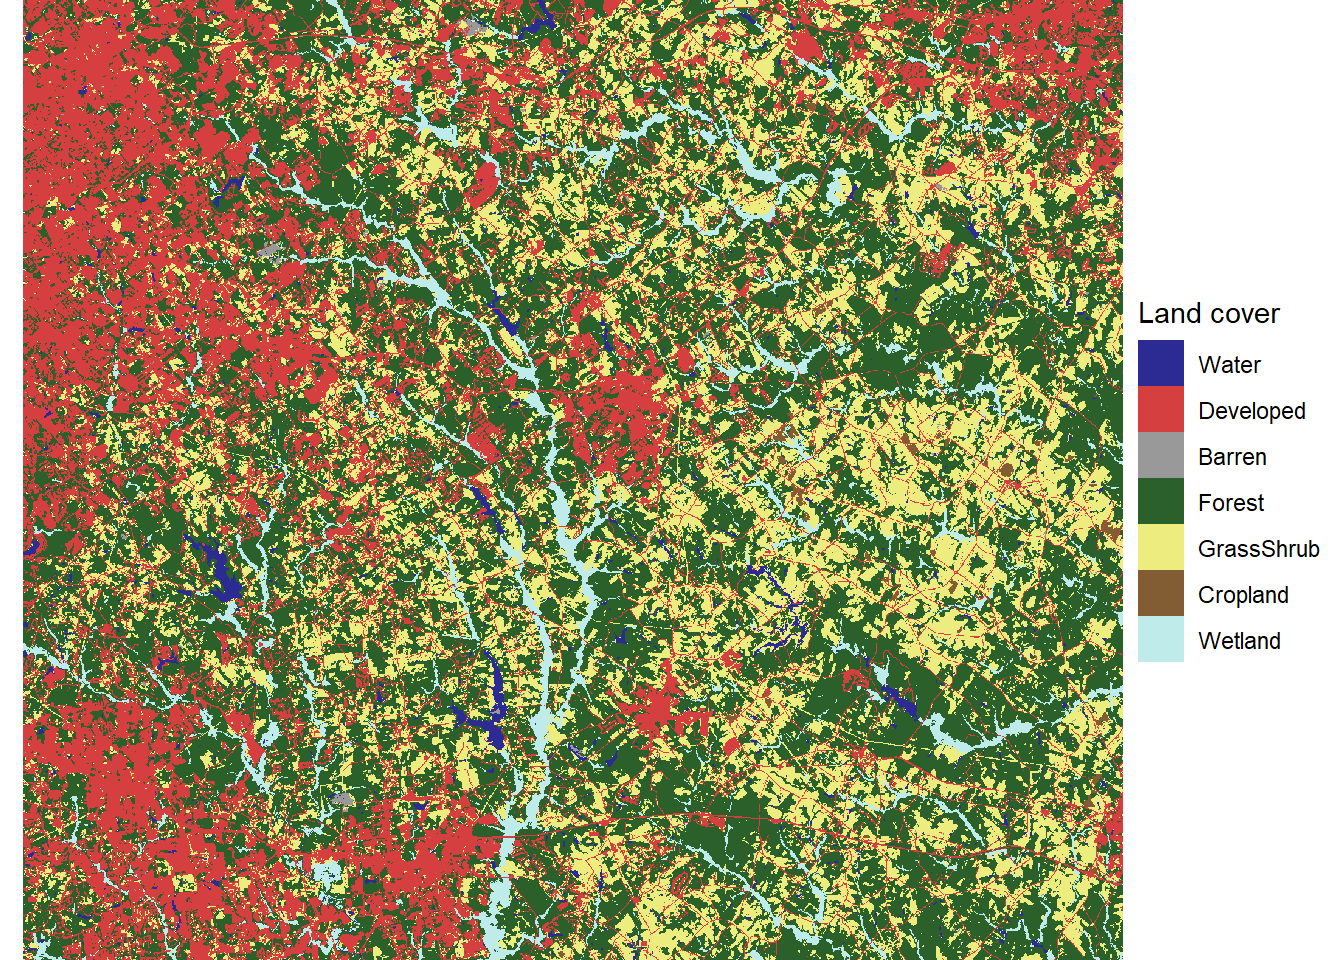 Walton County land cover data in an Albers Equal Area coordinate reference system for the conterminous United States.